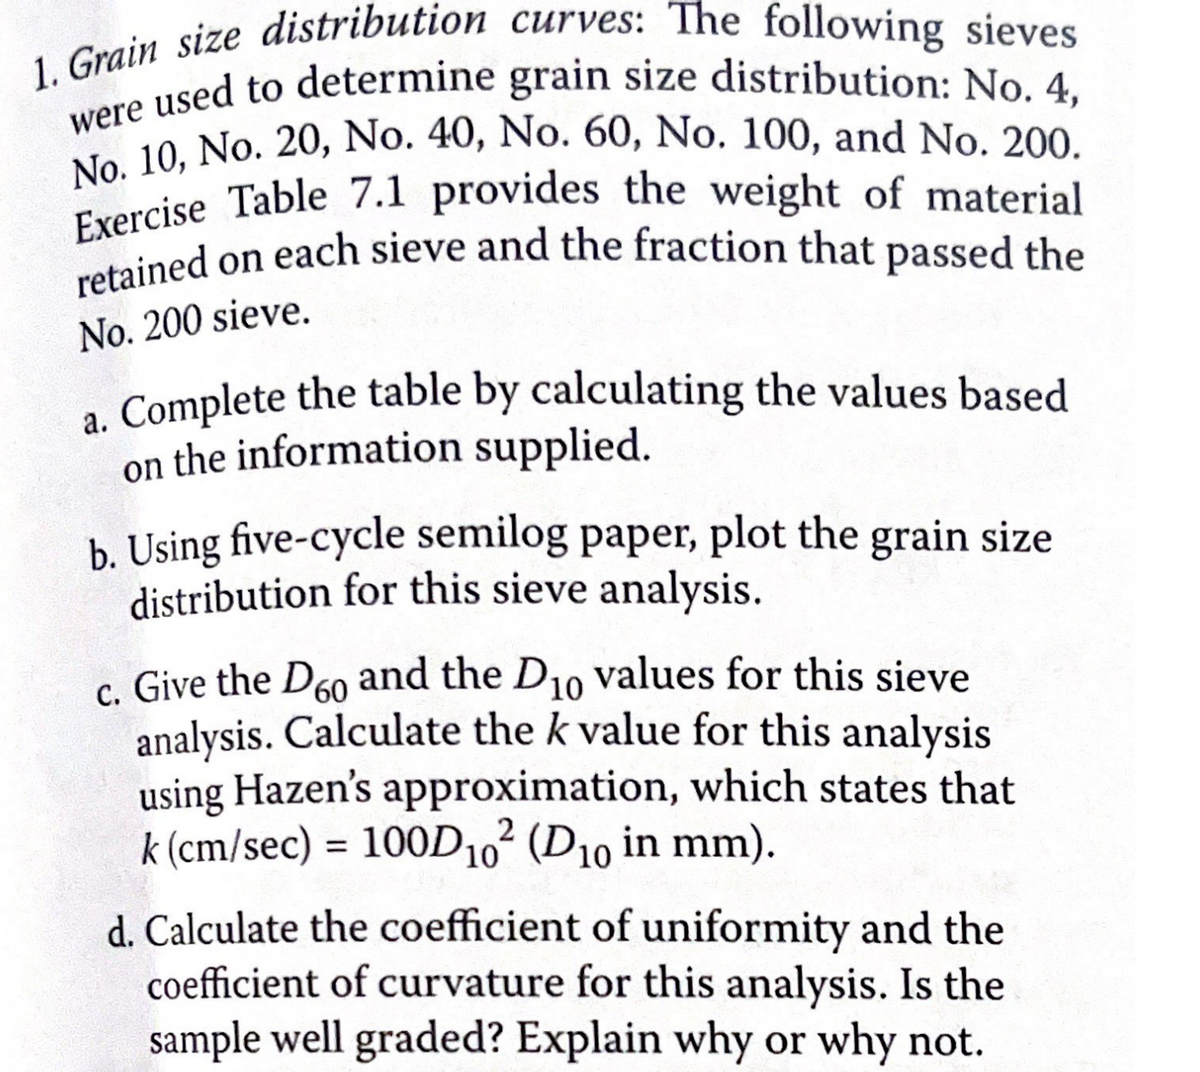 1. Grain size distribution curves: The following sieves
were used to determine grain size distribution: No. 4,
No. 10, No. 20, No. 40, No. 60, No. 100, and No. 200.
Exercise Table 7.1 provides the weight of material
retained on each sieve and the fraction that passed the
No. 200 sieve.
a. Complete the table by calculating the values based
on the information supplied.
b. Using five-cycle semilog paper, plot the grain size
distribution for this sieve analysis.
c. Give the D60 and the D10 values for this sieve
analysis. Calculate the k value for this analysis
using Hazen's approximation, which states that
k (cm/sec) = 100D10² (D10 in mm).
d. Calculate the coefficient of uniformity and the
coefficient of curvature for this analysis. Is the
sample well graded? Explain why or why not.